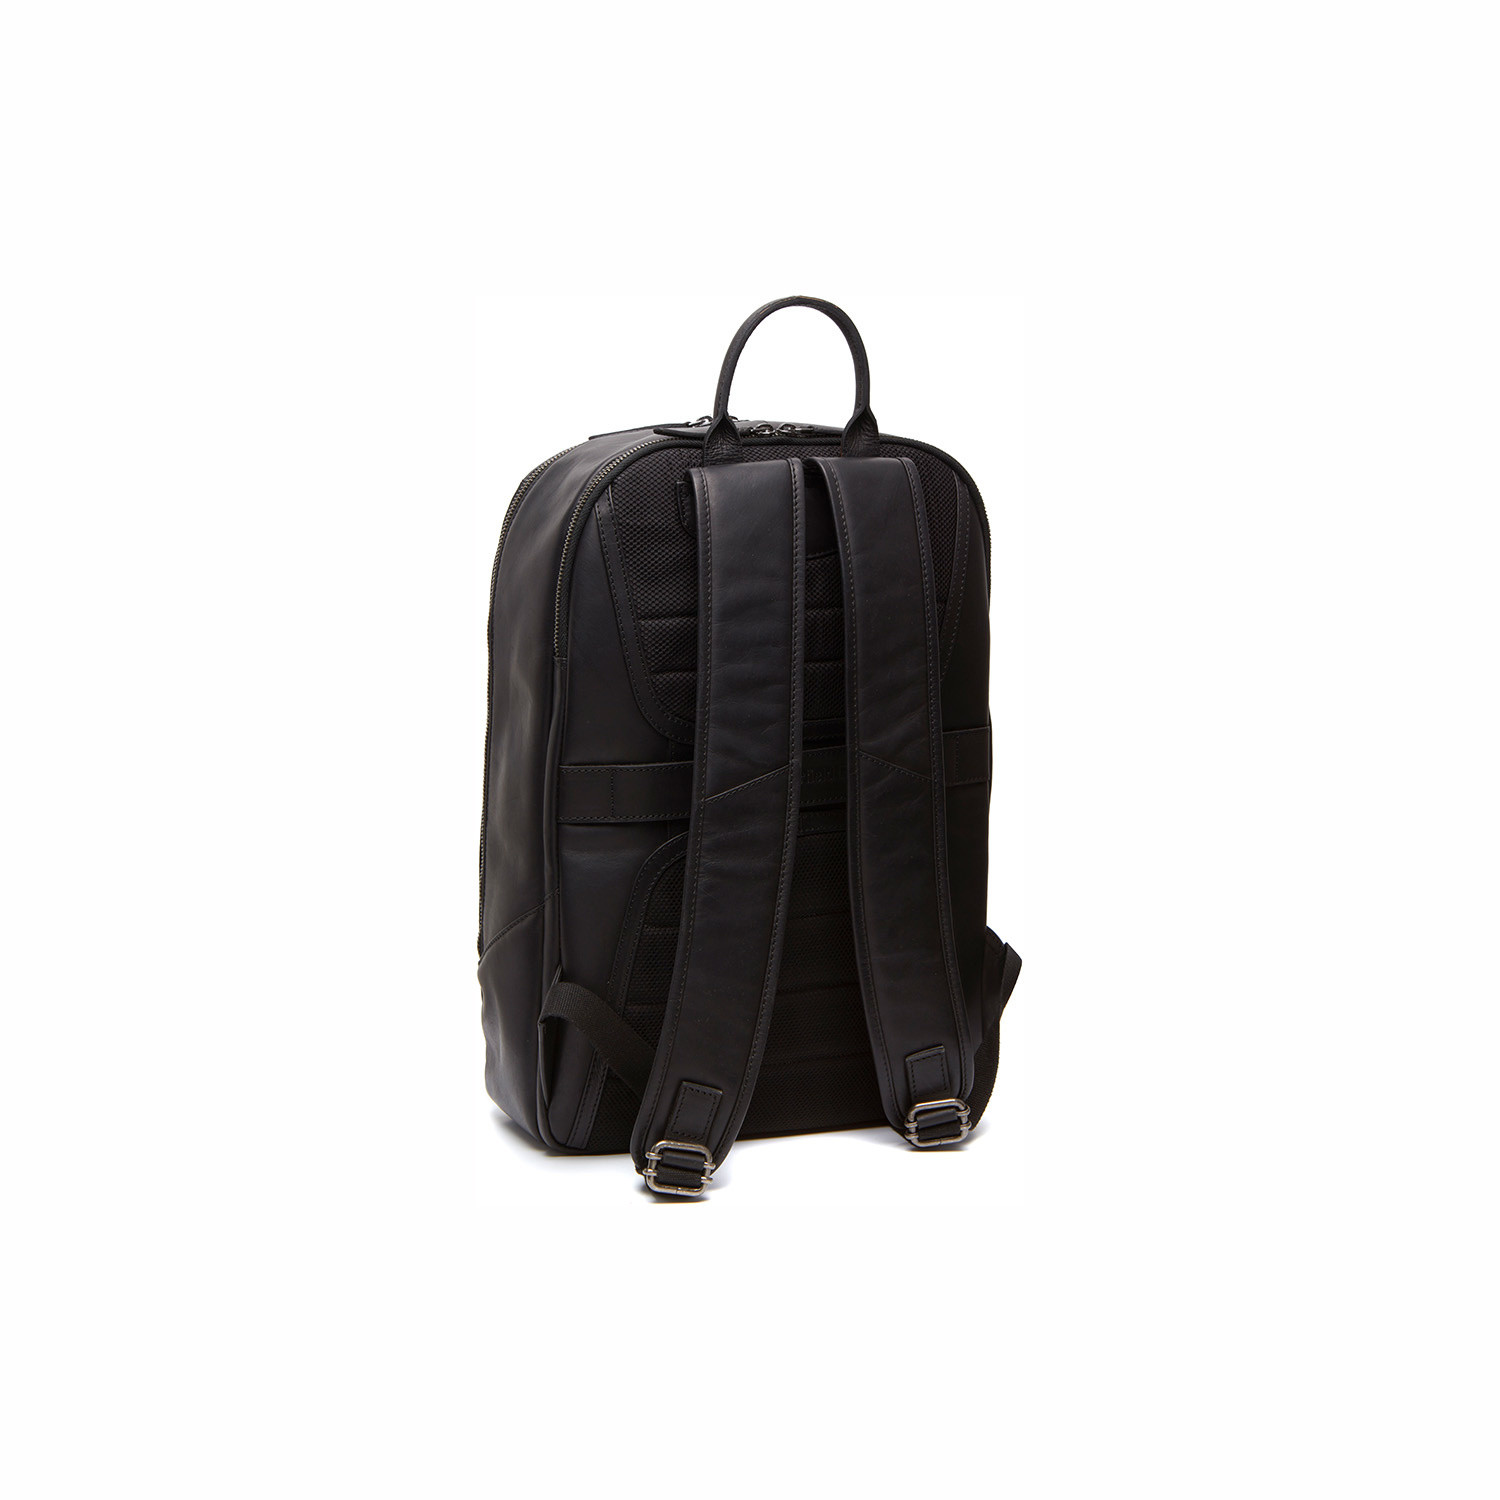 Leather Backpack Black Bangkok - The Chesterfield Brand